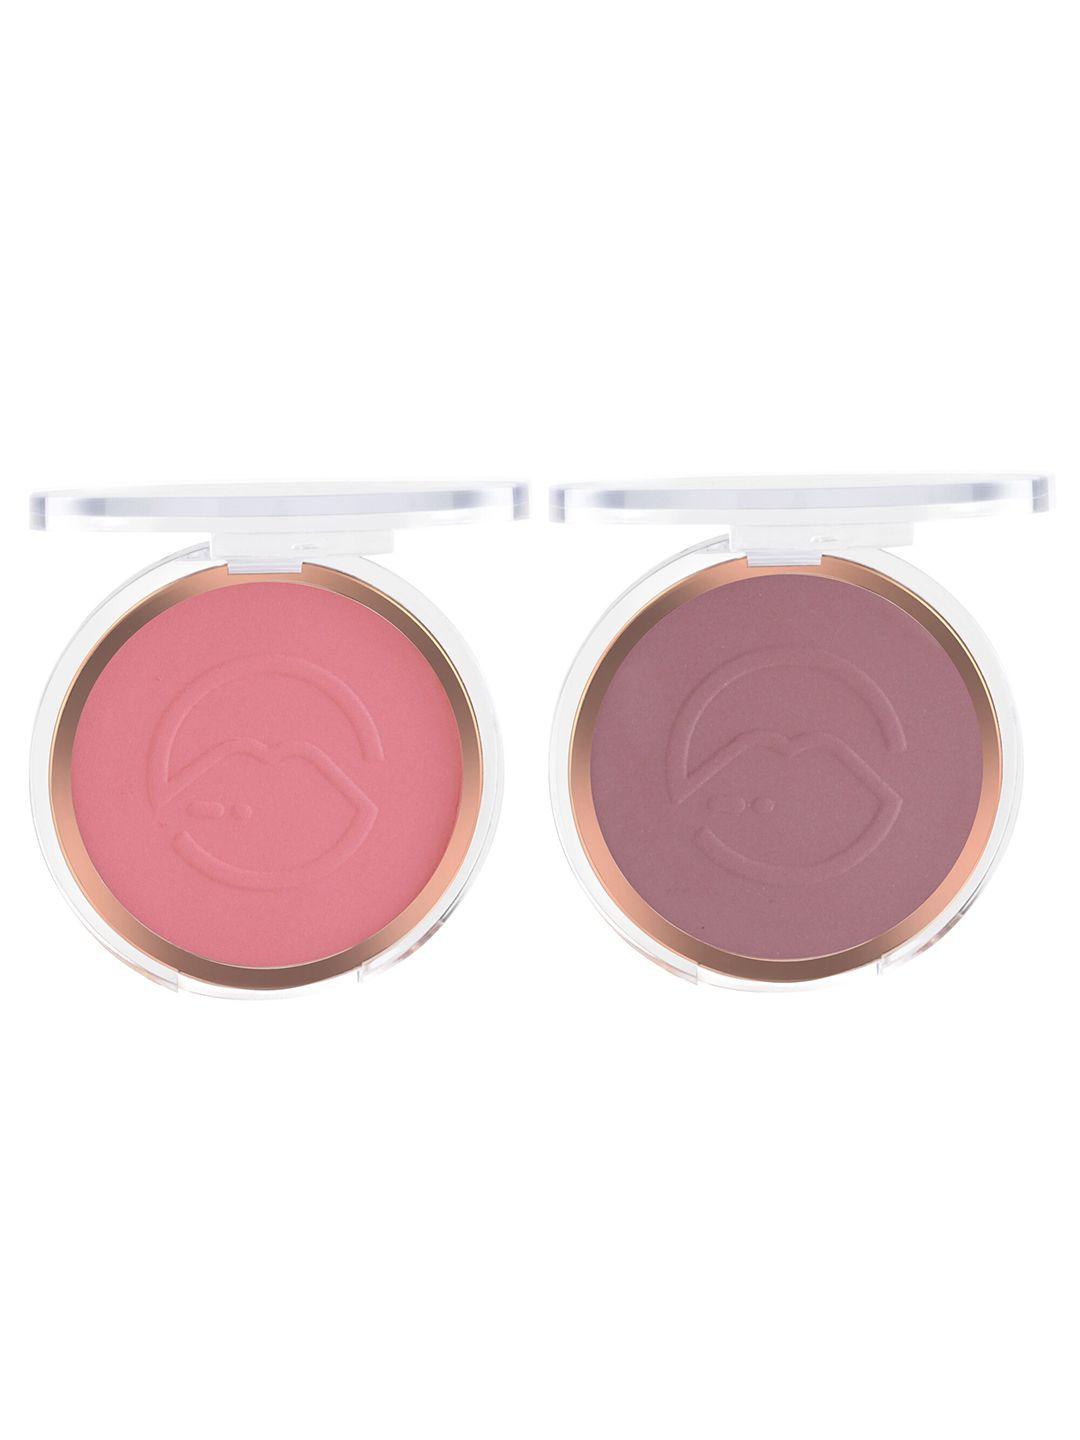 mars set of 2 flush of love highly pigmented matte face blusher - shade 03 & 04